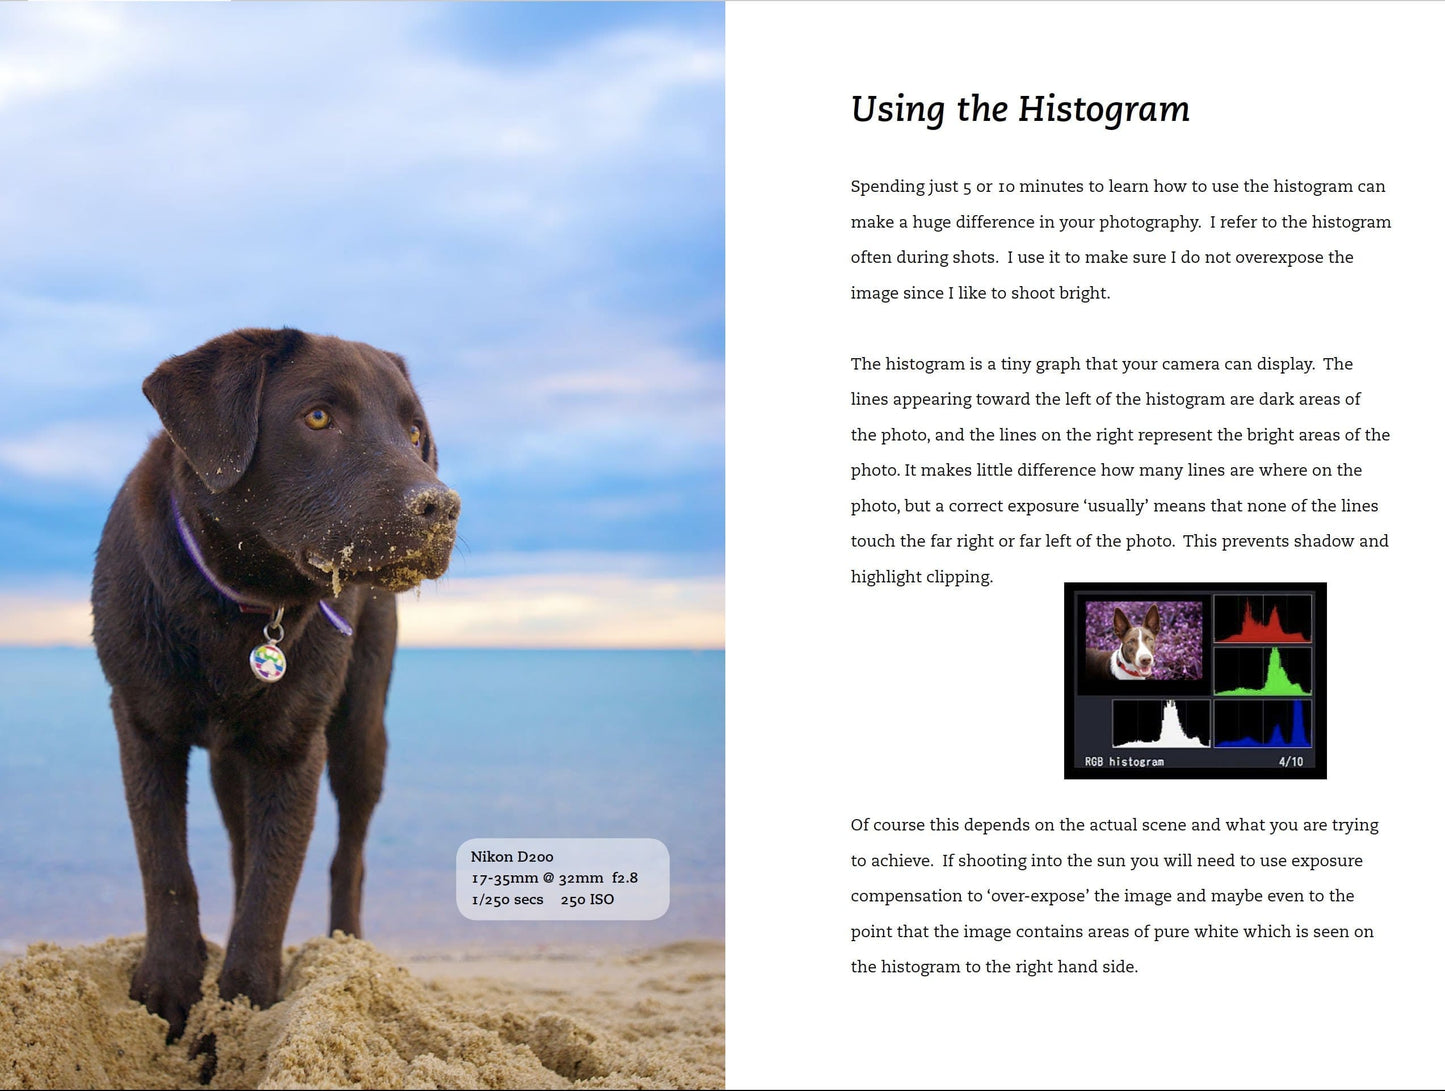 Pet Photography How-To by 'Wet Nose Fotos' founder Shannon Wild 2nd Edition